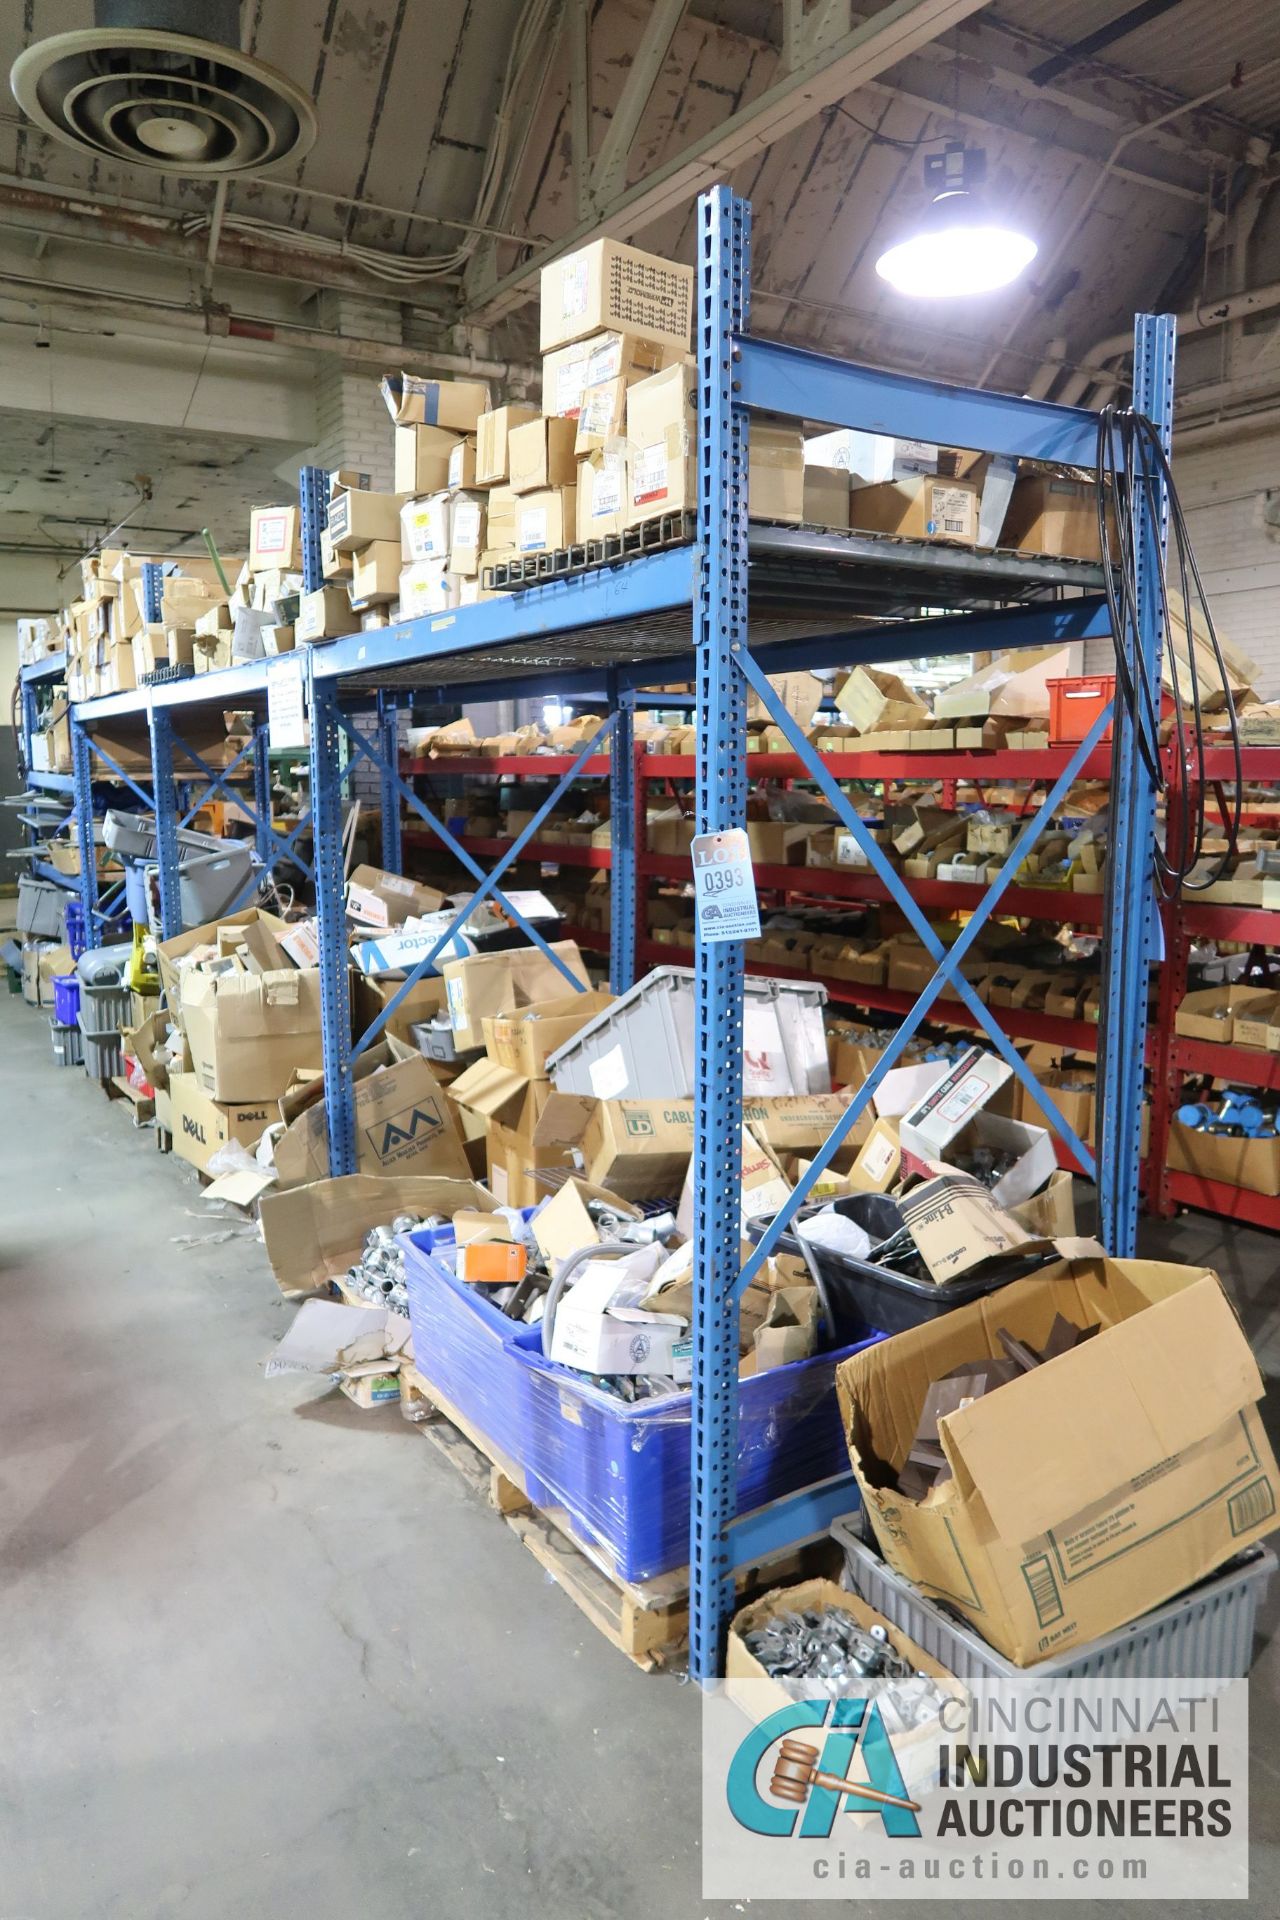 (LOT) CONTENTS OF (4) SECTIONS RACK - MOSTLY ELECTRICAL HARDWARE INCLUDING CONDUIT COUPLINGS,